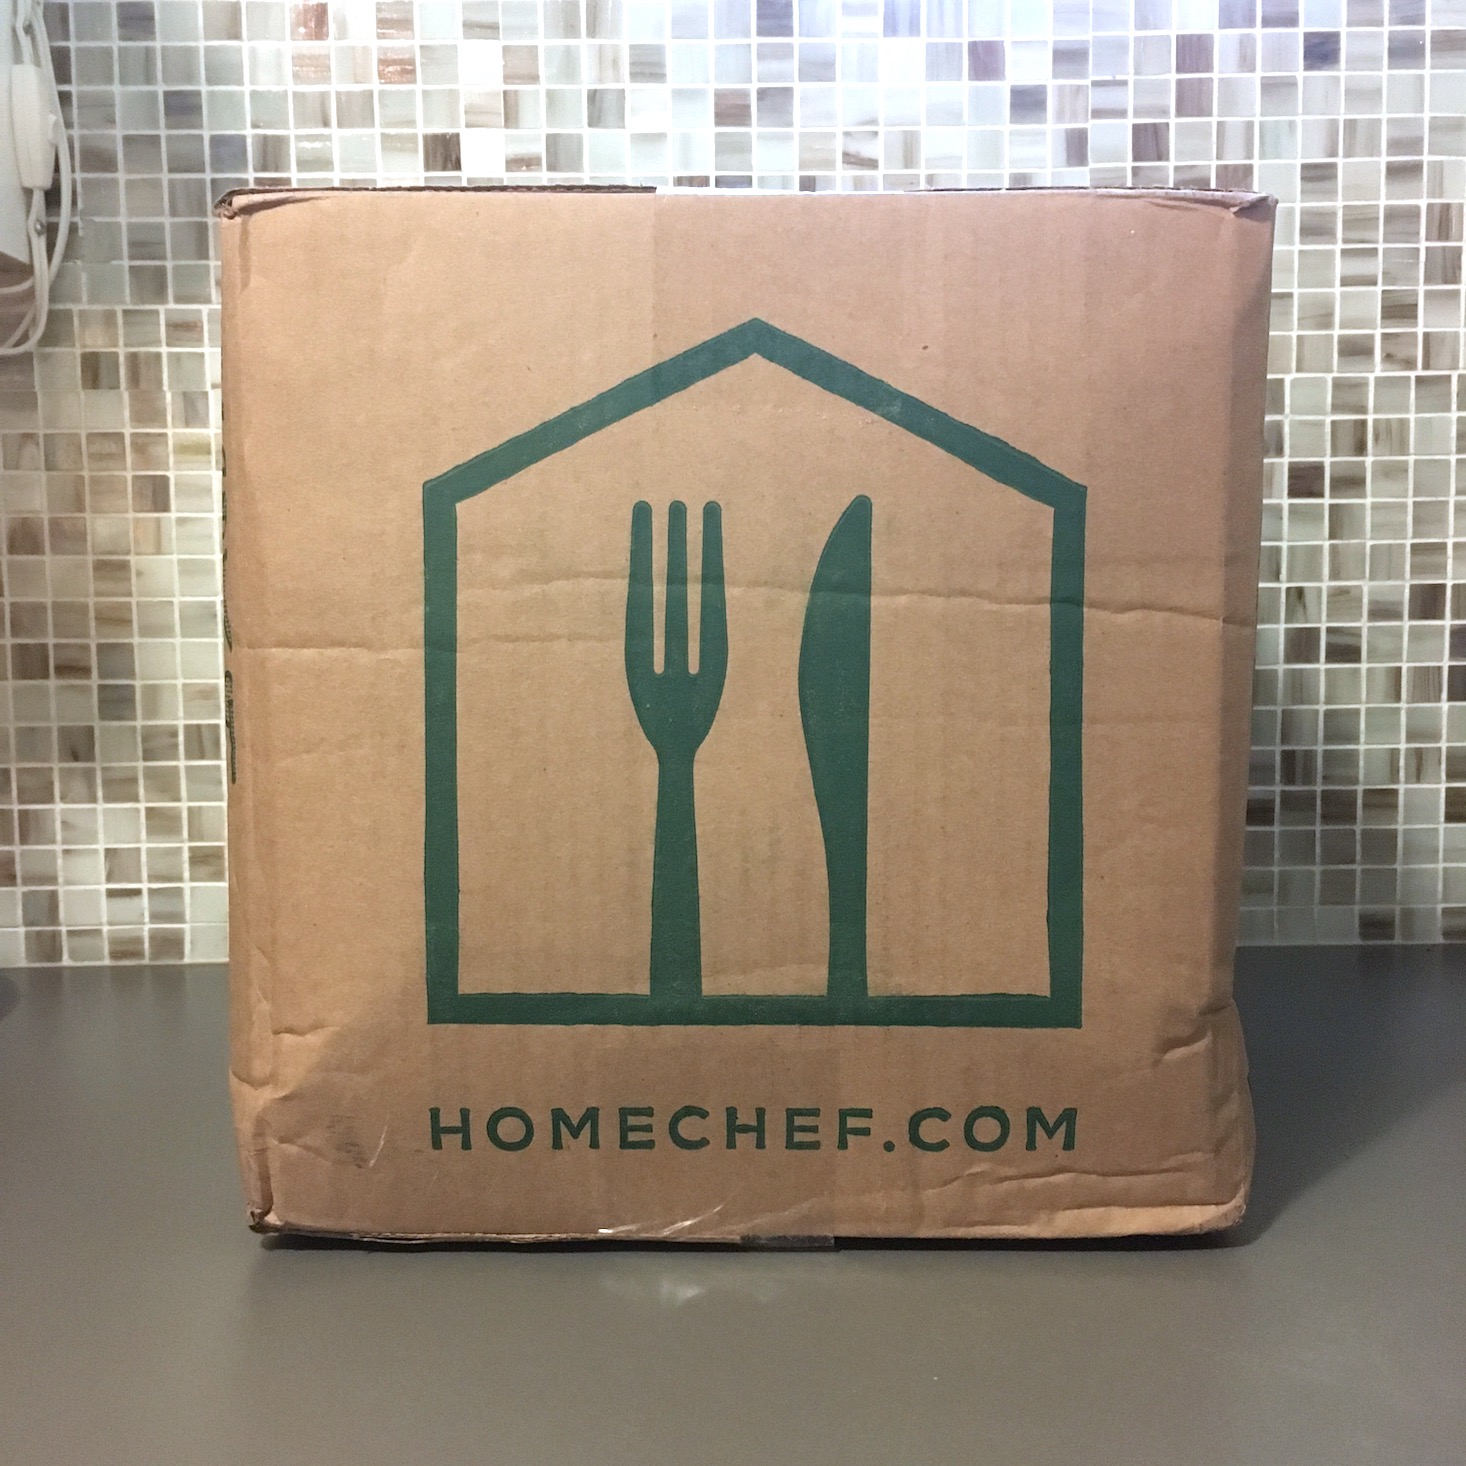 Home Chef Meal Kit Review + Coupon – July 2020